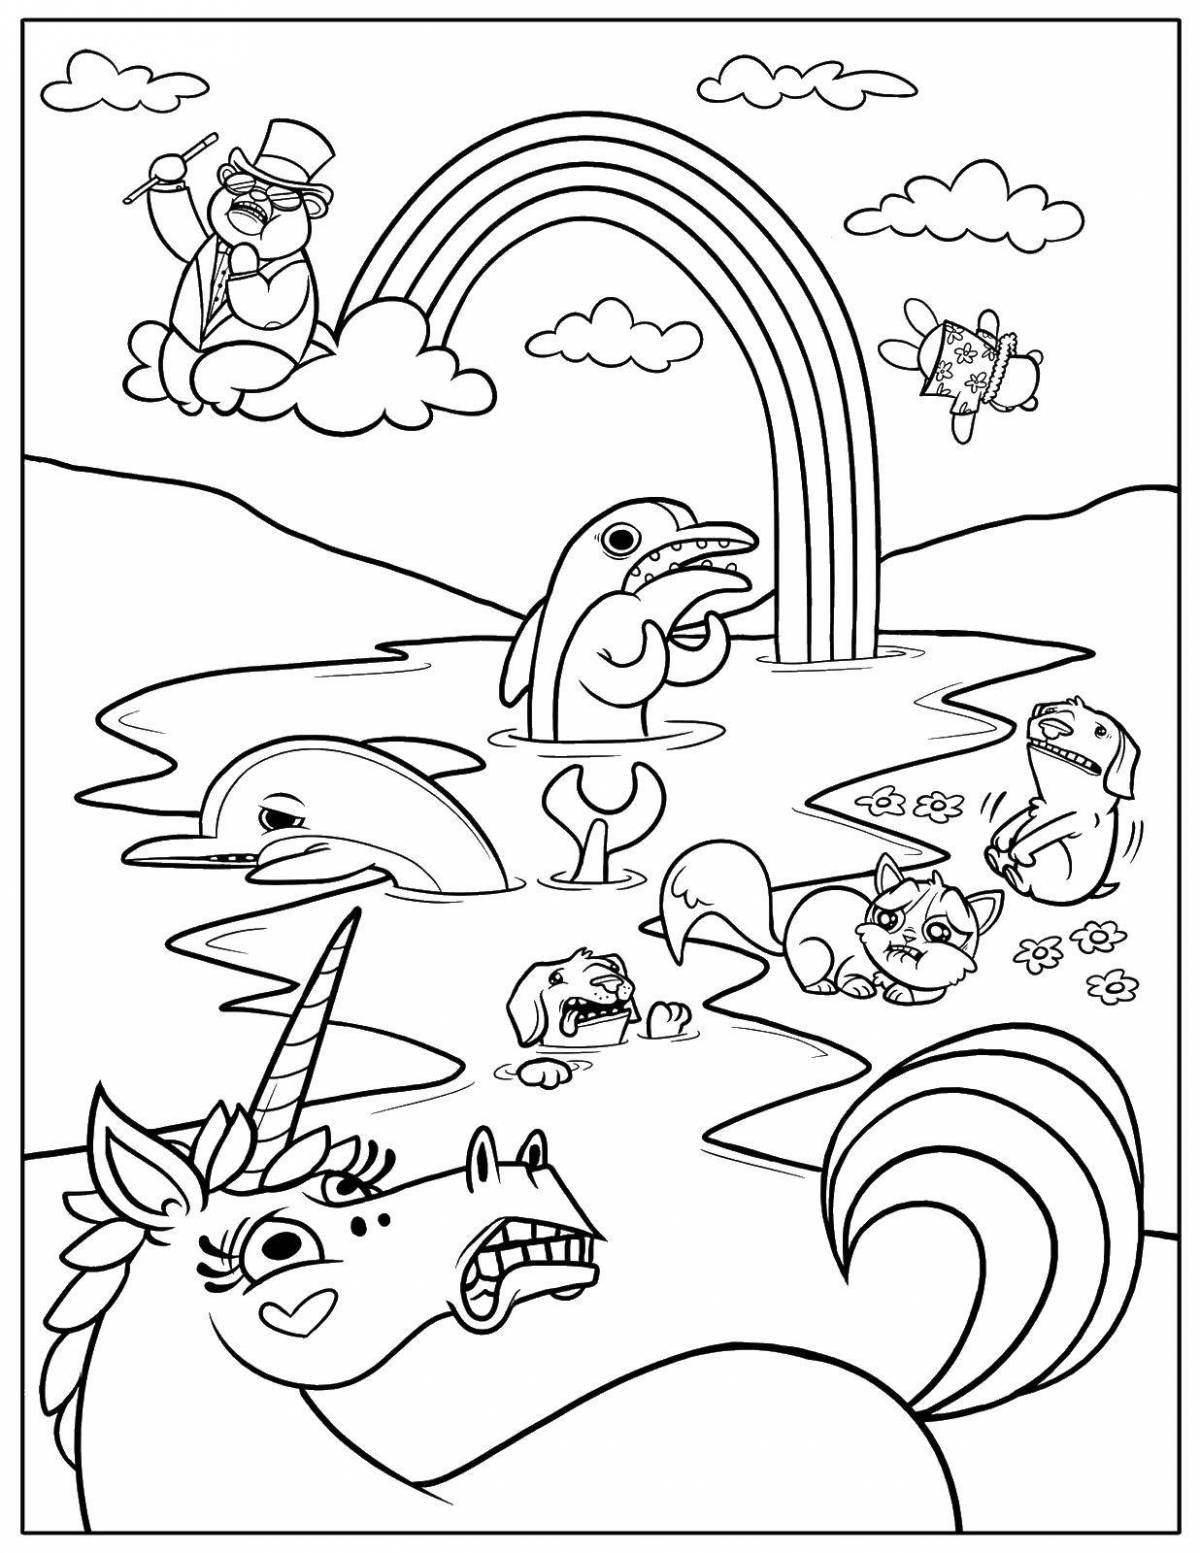 Colour coloring create a coloring page